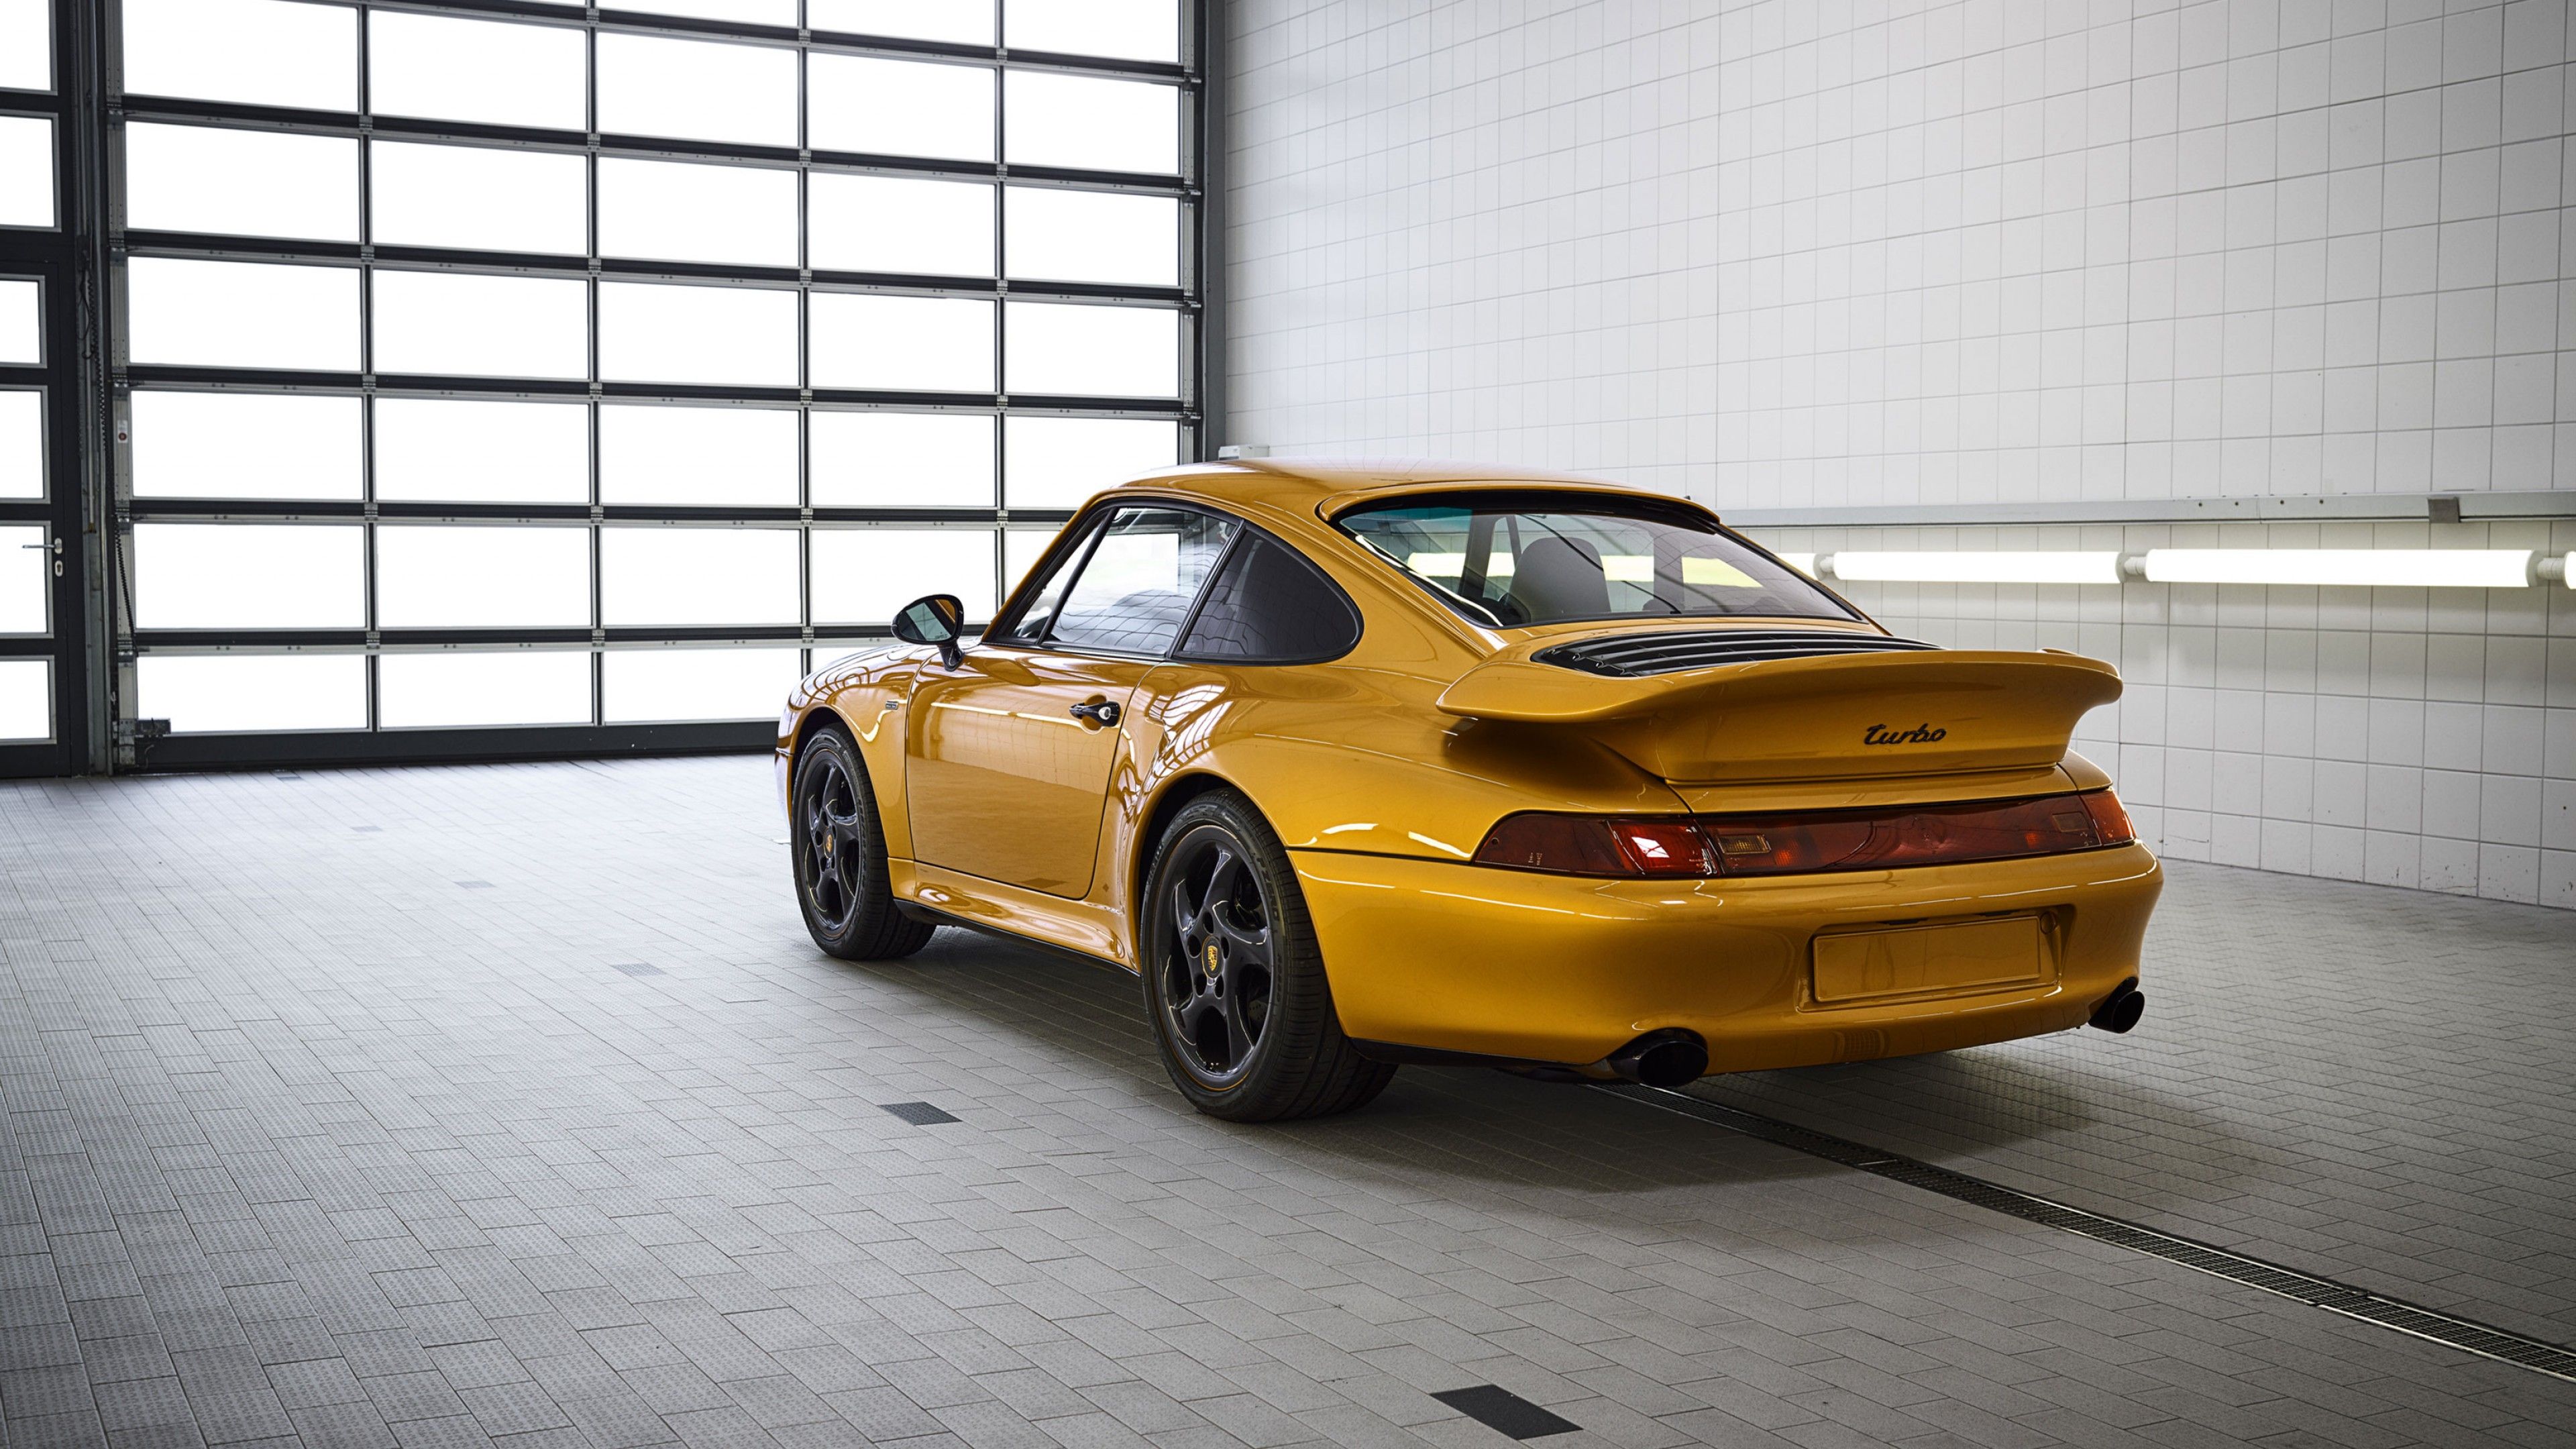 Wallpaper Porsche 993 Turbo S Project Gold, 2018 Cars, limited edition, 4K, Cars & Bikes